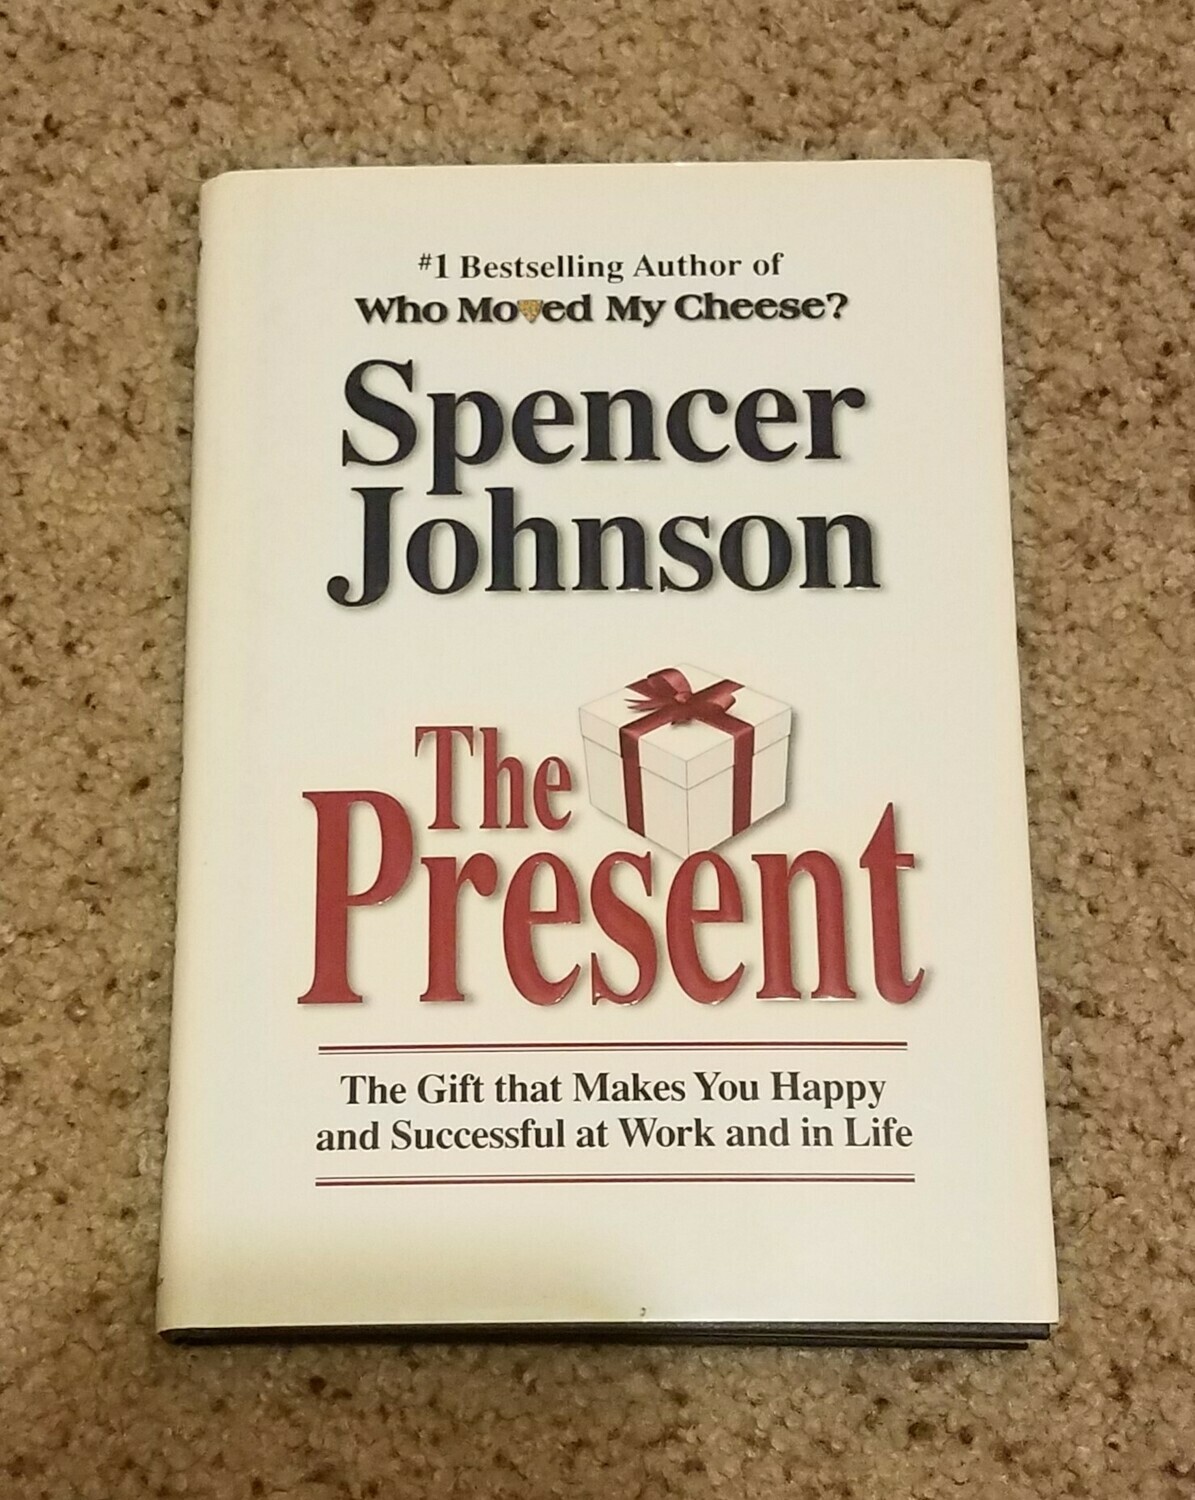 The Present by Spencer Johnson